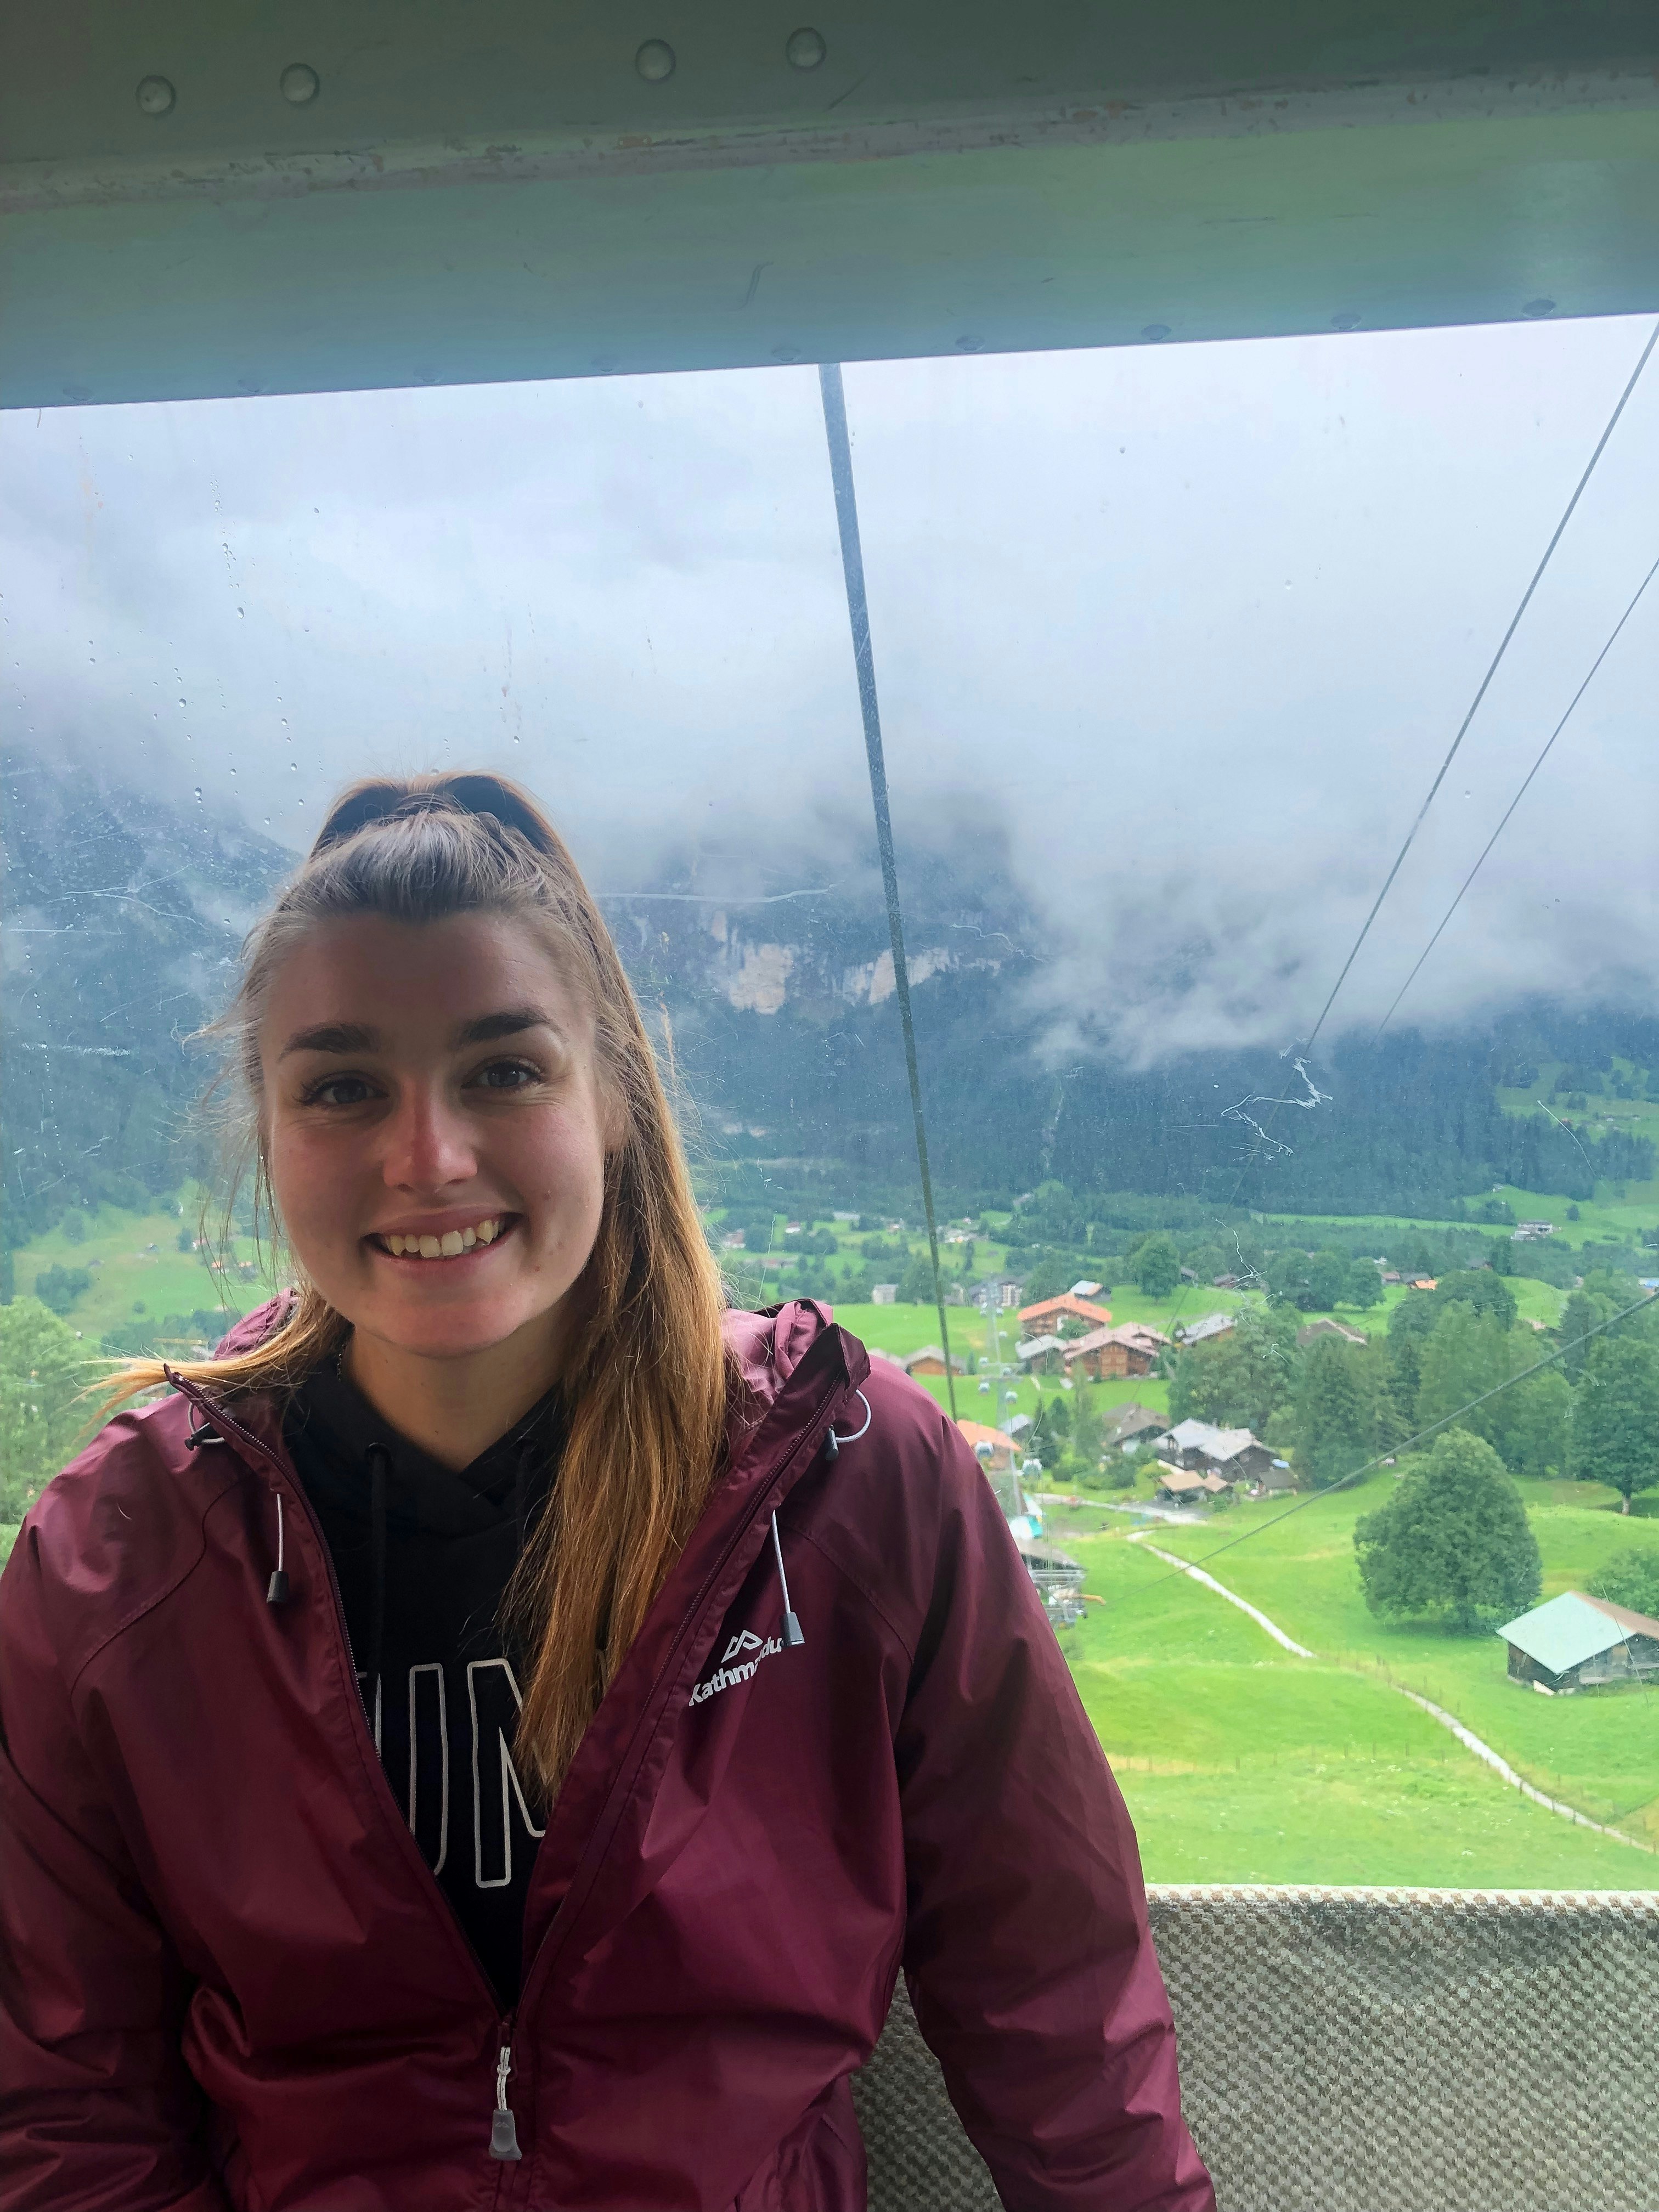 A young woman is in a cable car, riding up a mountain. She is smiling and looking at the camera and, behind her, clouds can be seen lingering above a mountain village. 